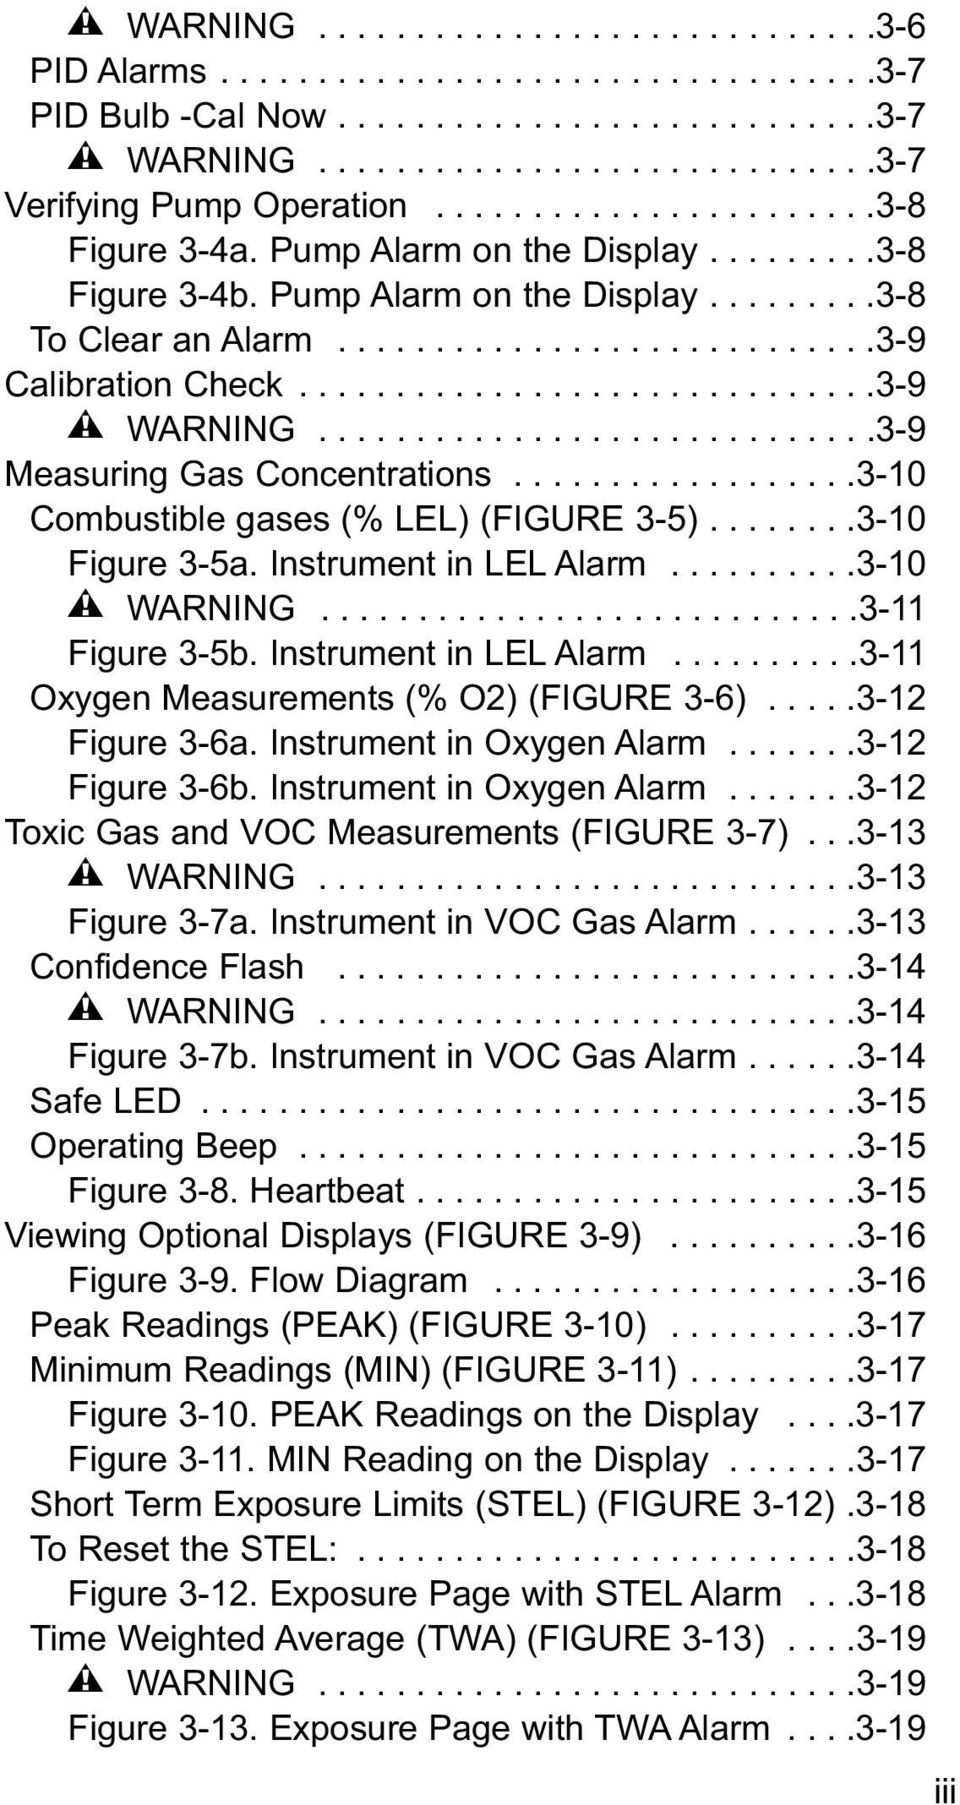 .............................3-9 " WARNING.............................3-9 Measuring Gas Concentrations..................3-10 Combustible gases (% LEL) (FIGURE 3-5)........3-10 Figure 3-5a.